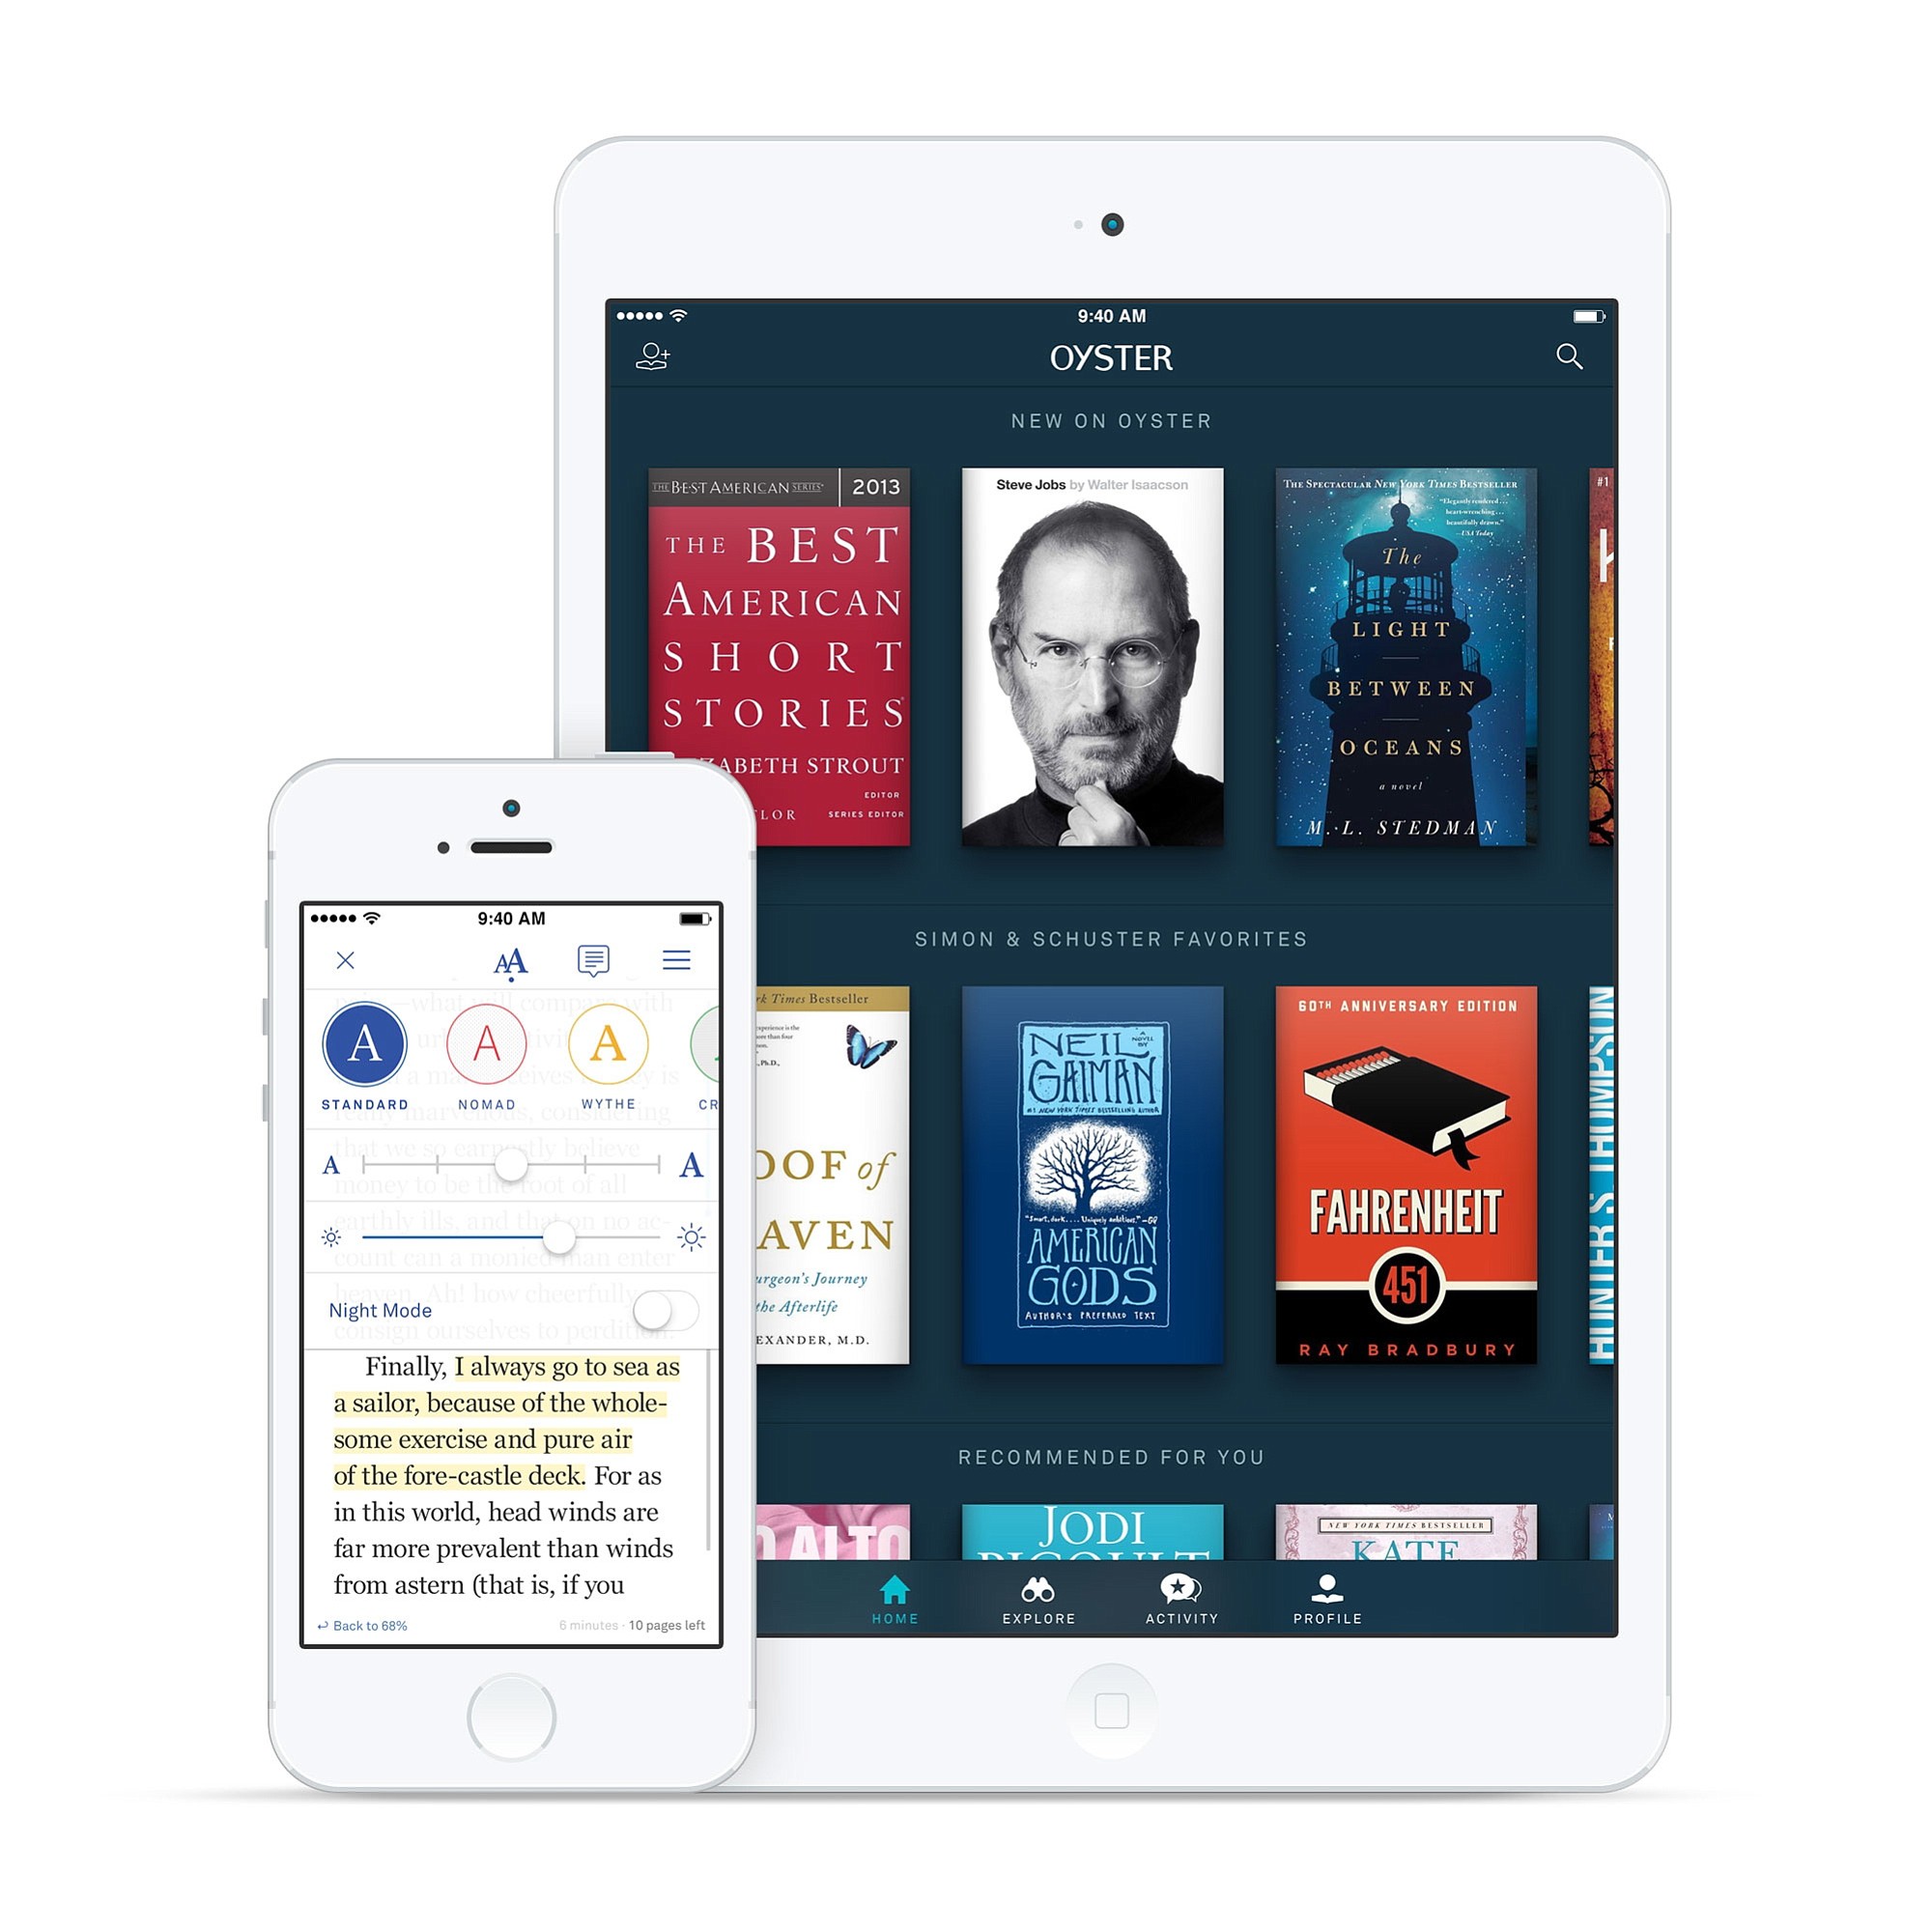 This product image provided by Oyster shows the Oyster e-book app on an iPhone, left, and iPad.